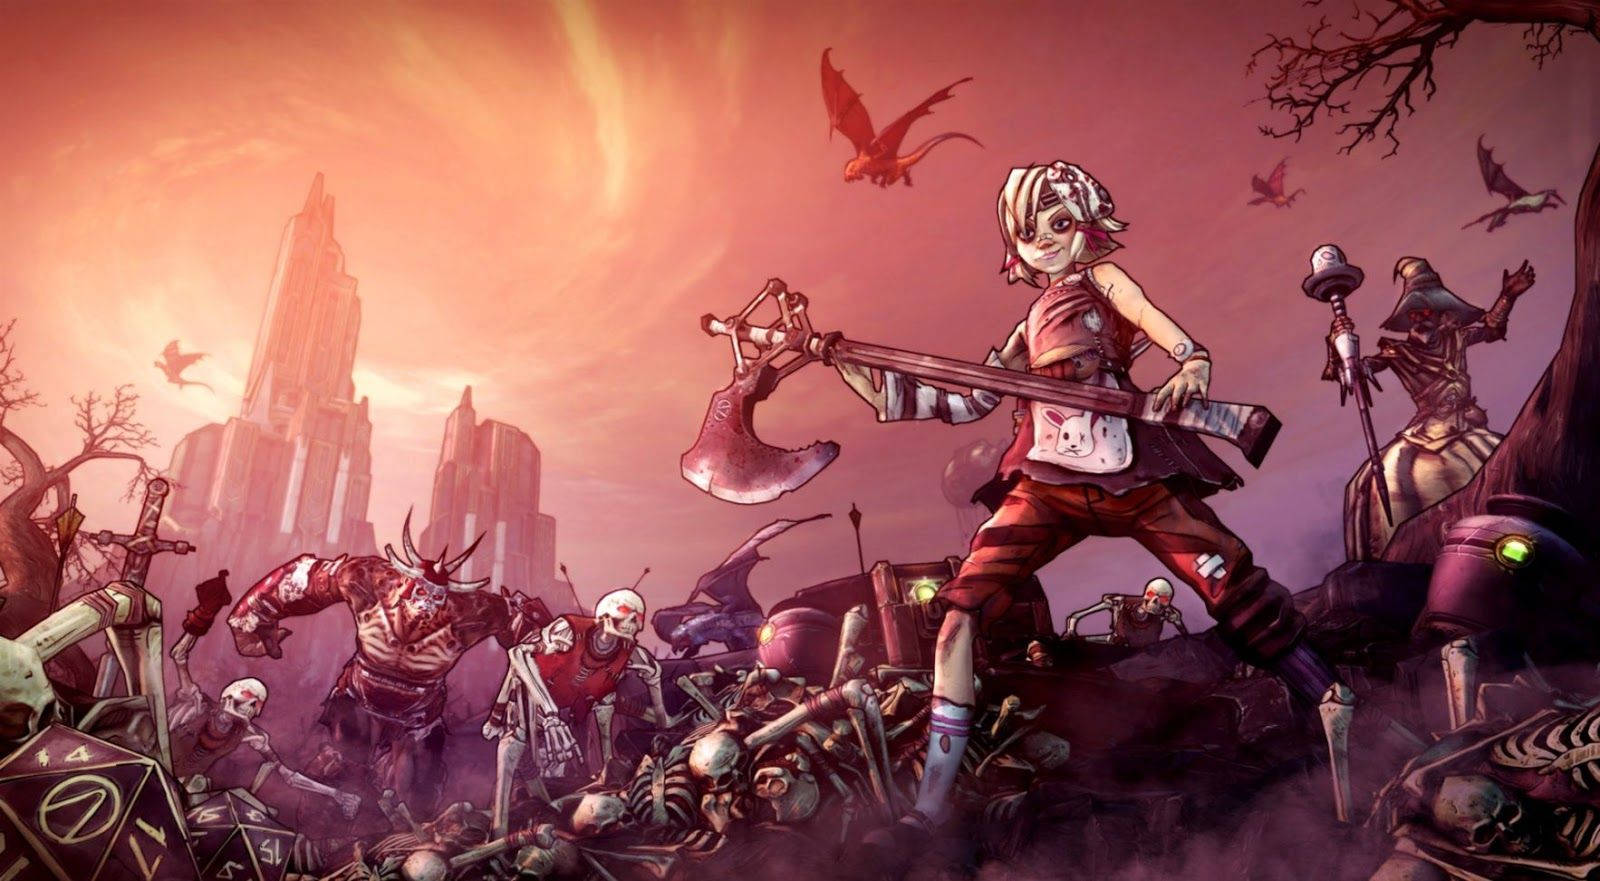 “A decisive battle to save the world of Borderlands!” Wallpaper